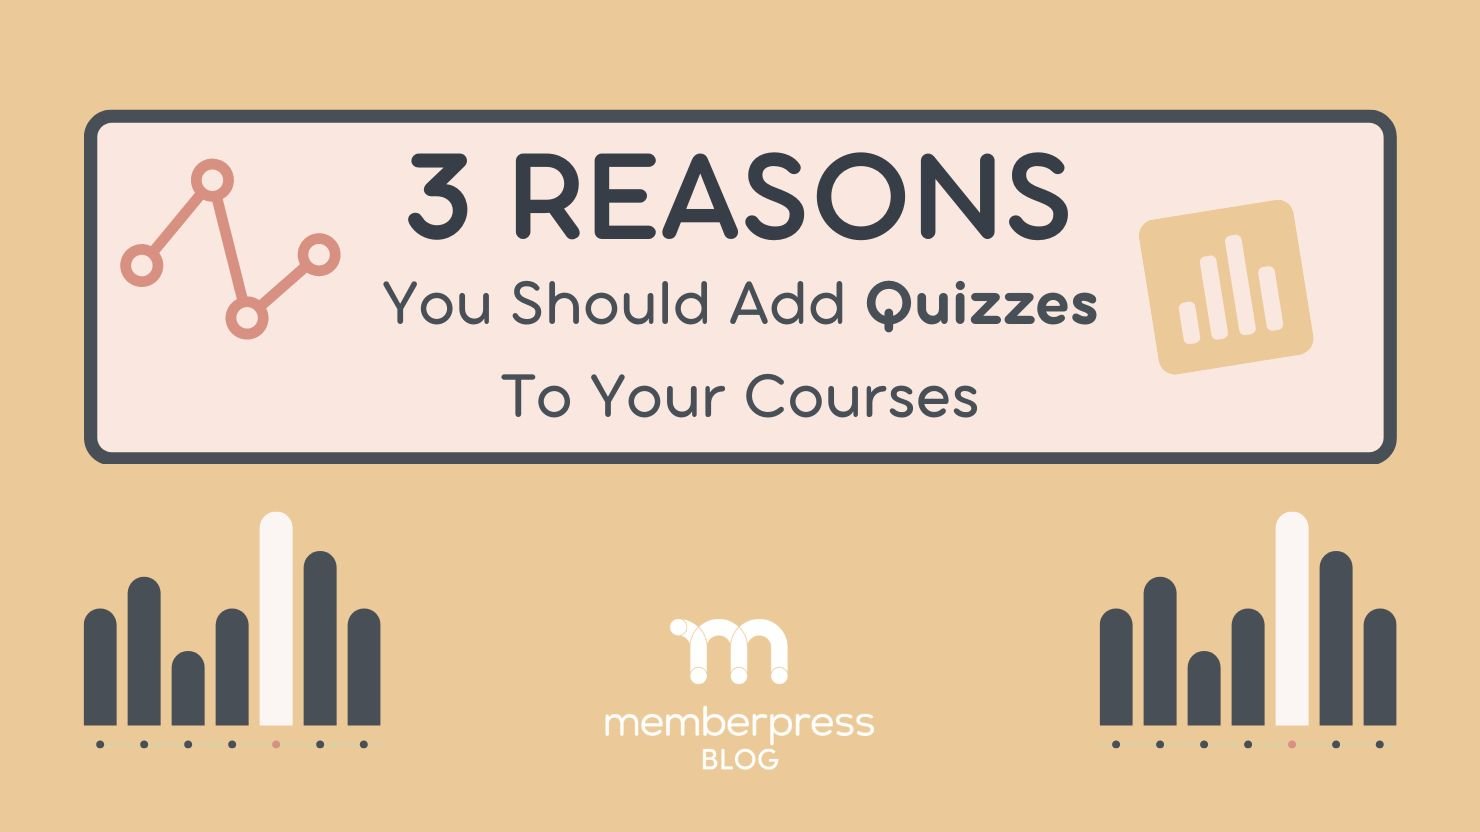 3 reasons you should add quizzes to your course